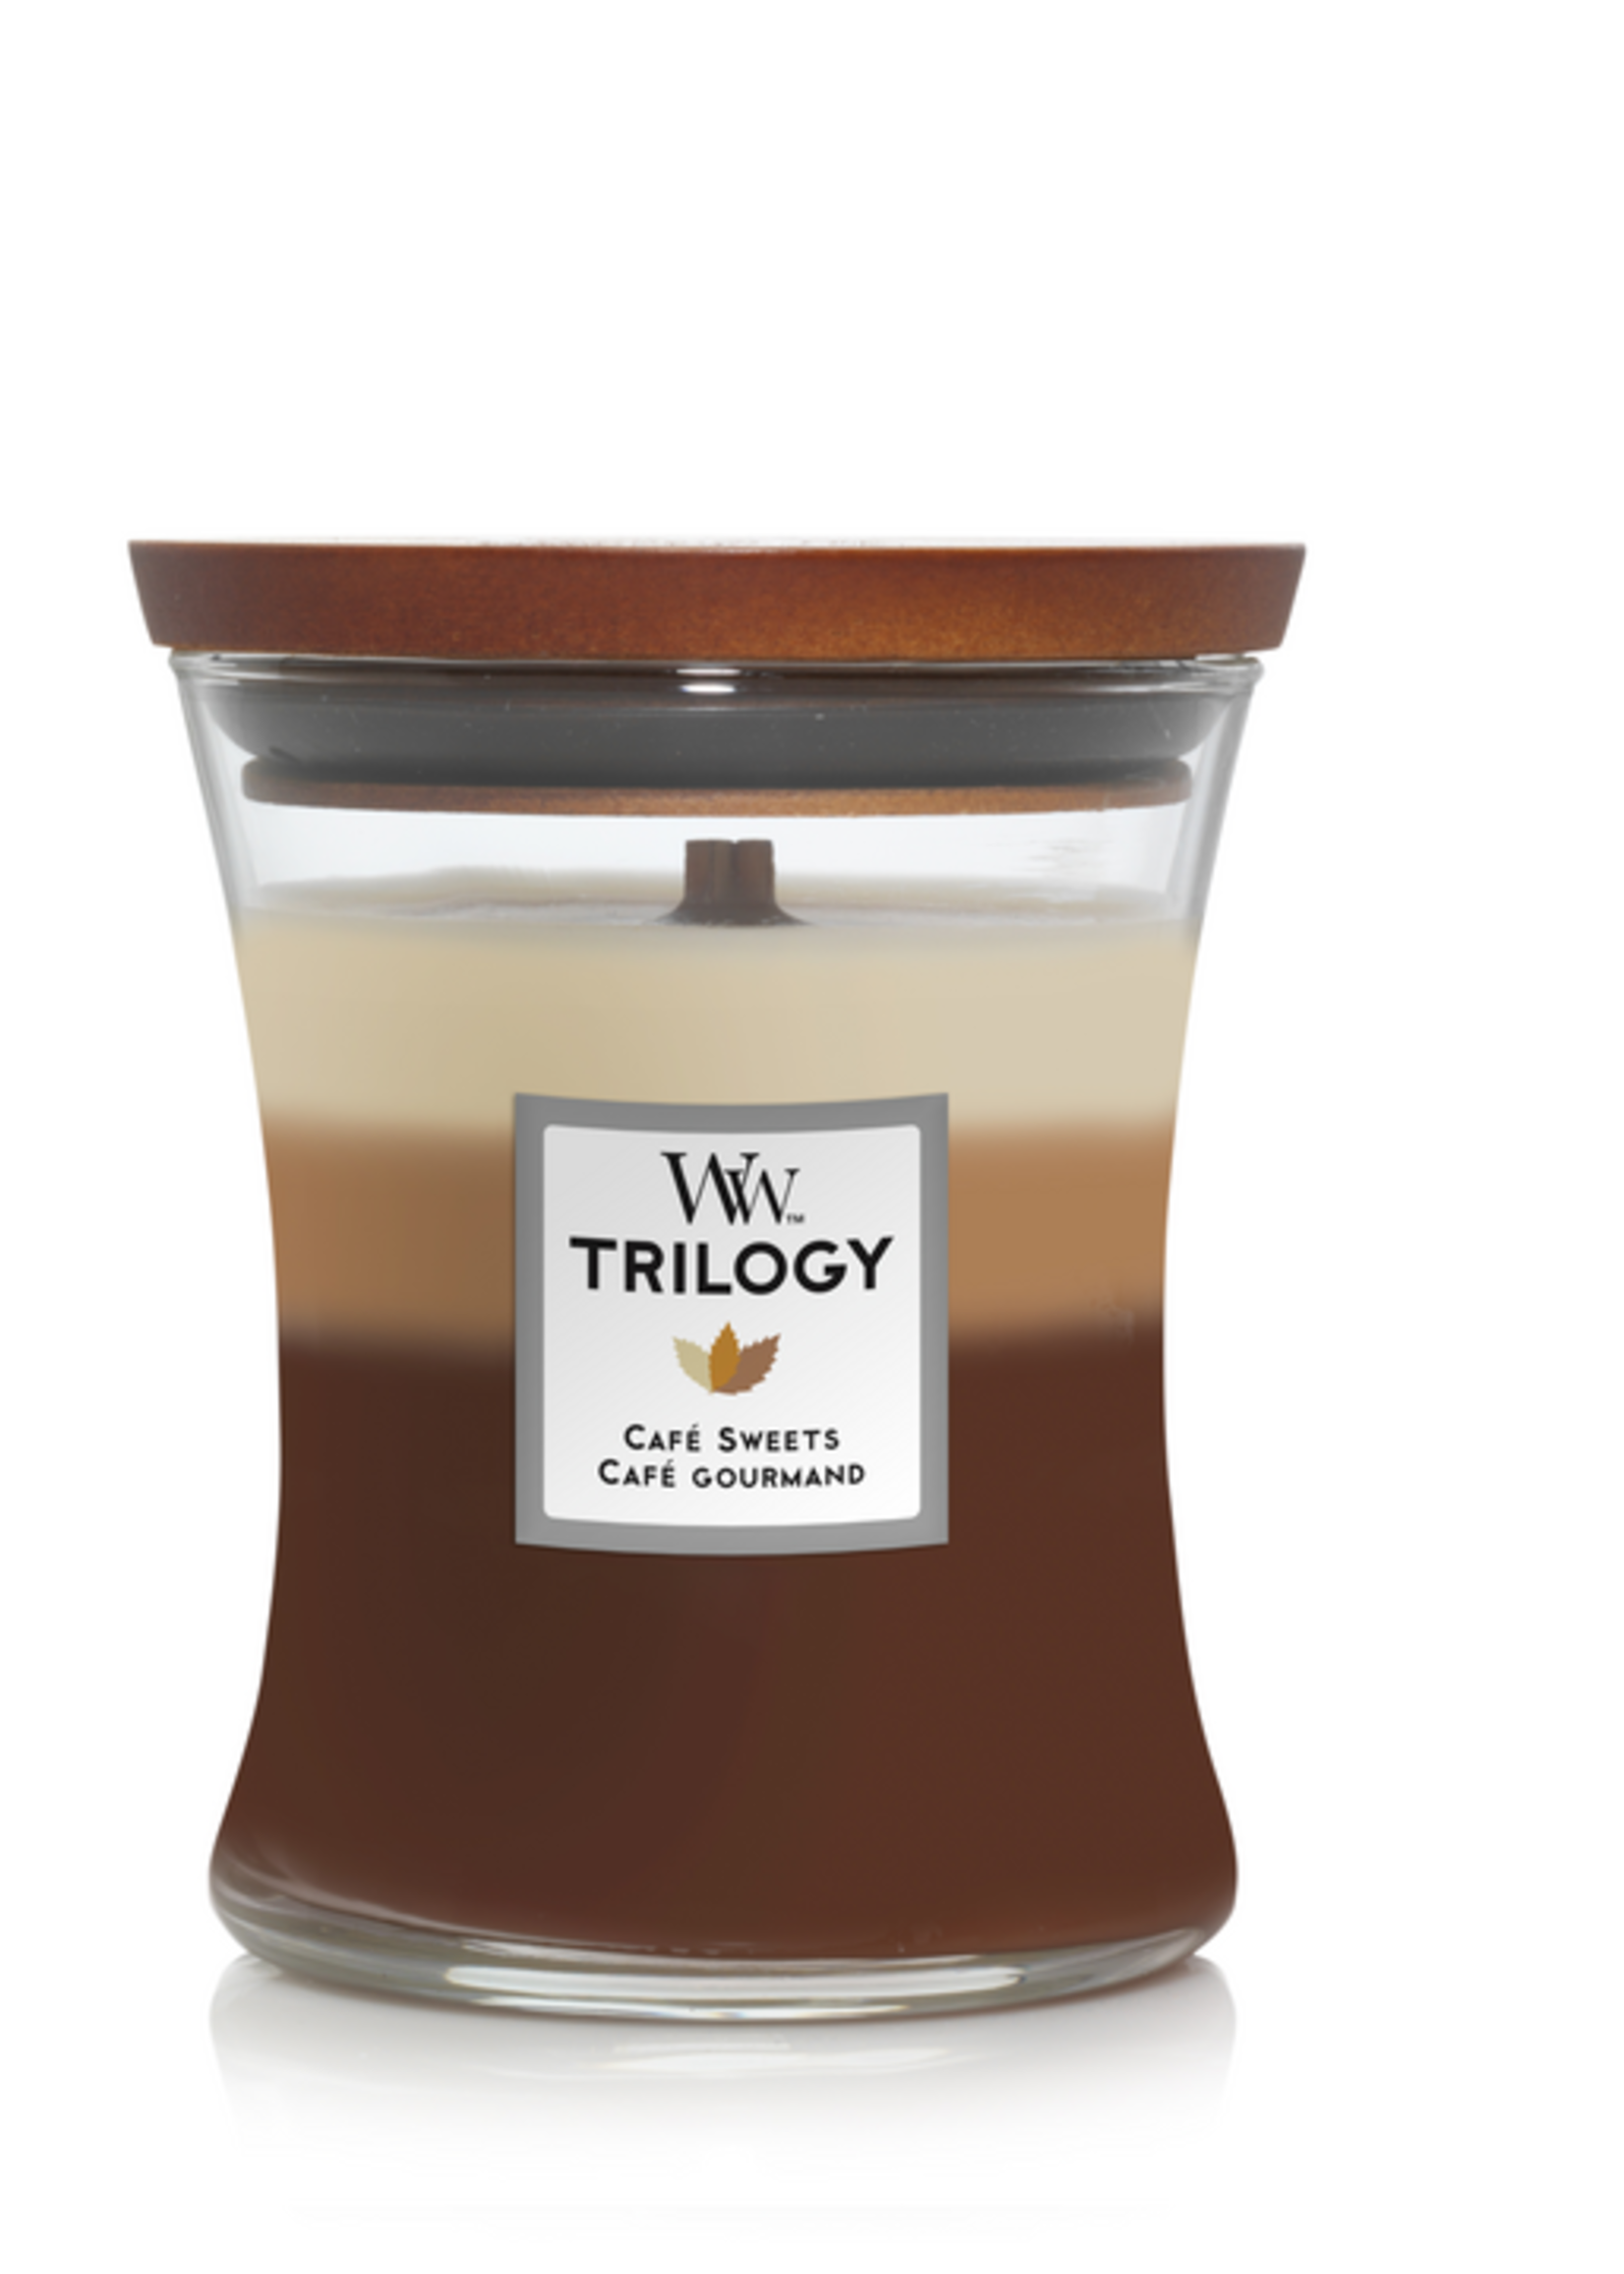 Woodwick Trilogy cafe sweets candle